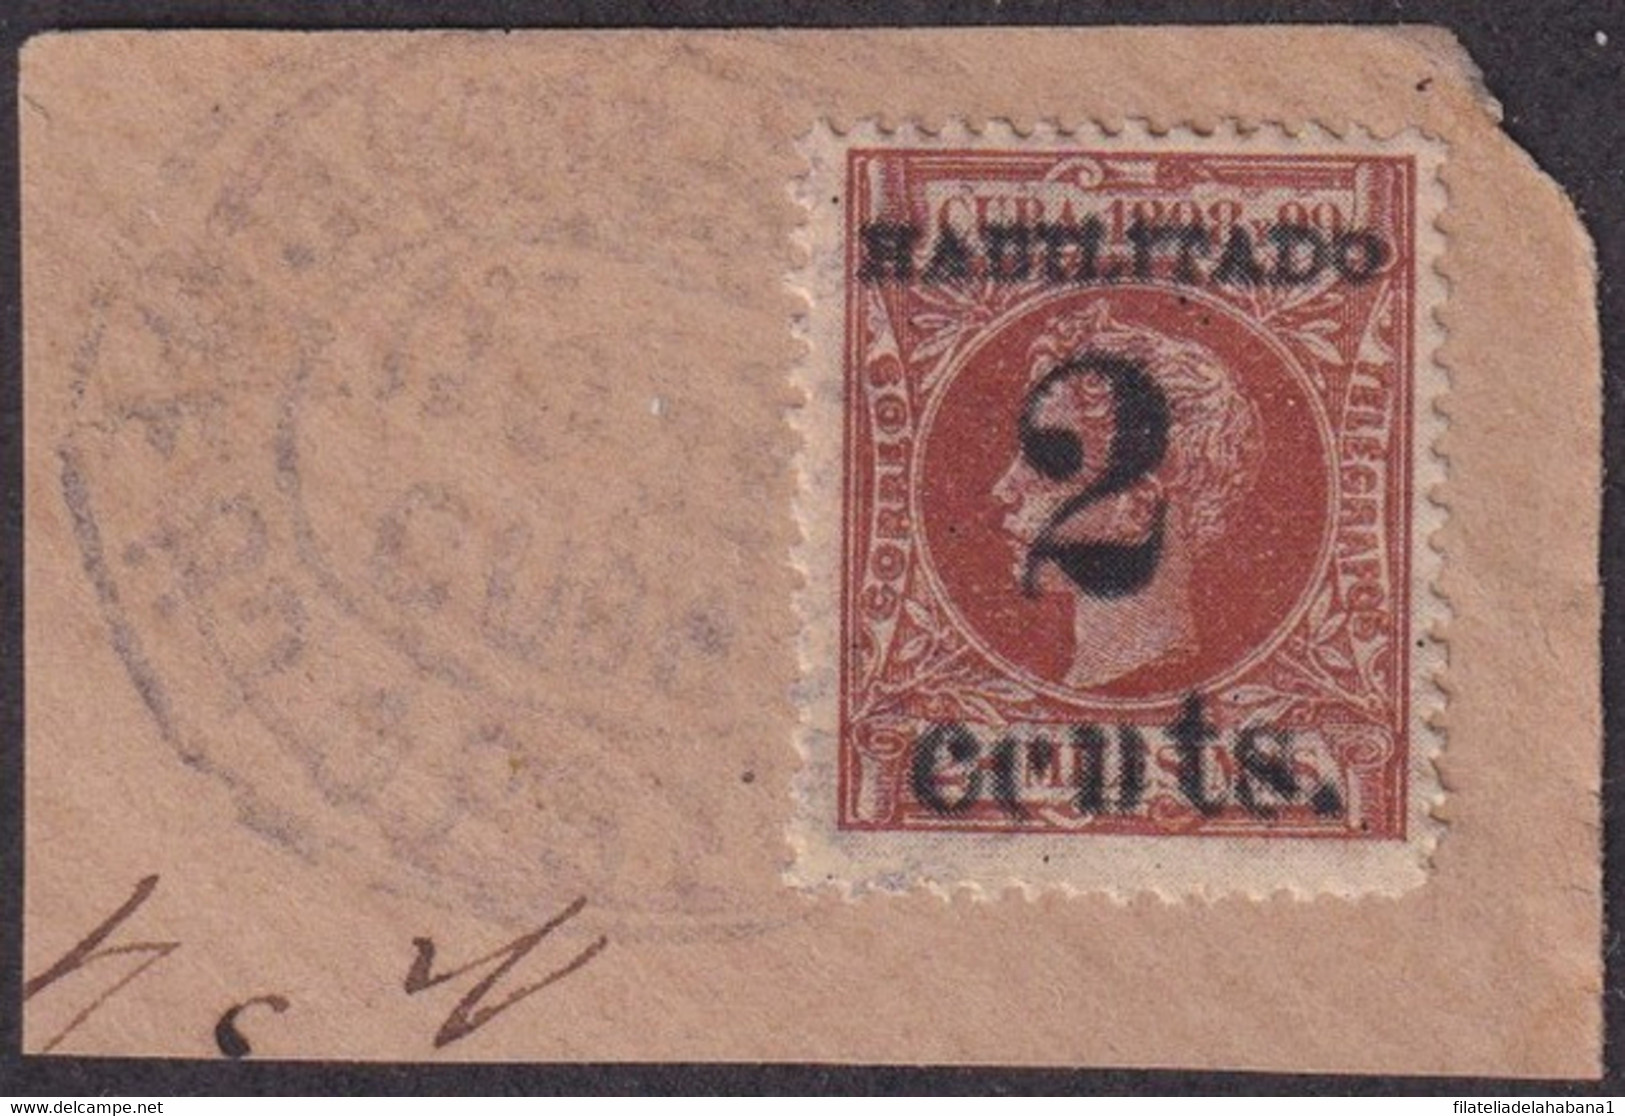 1899-629 CUBA 1899 US OCCUPATION FORGERY PUERTO PRINCIPE 1º ISSUE. 2c S. 2ml. USED IN FRAGMENT MILITAR ESTATION CANCEL - Usados